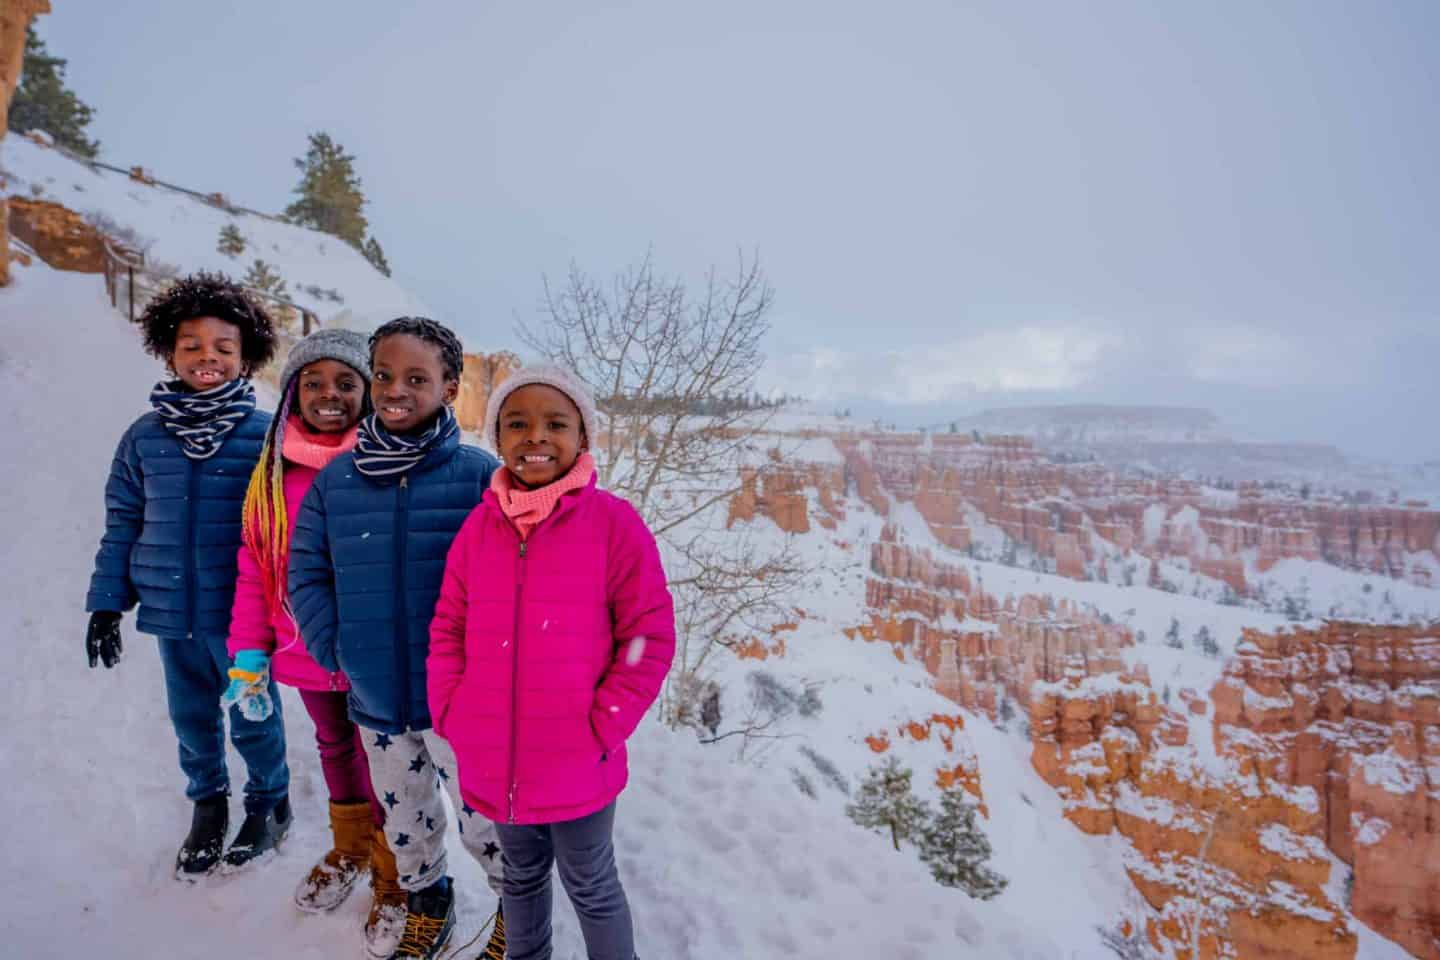 Children standing in front of a grand view at Bryce Canyon National Park.